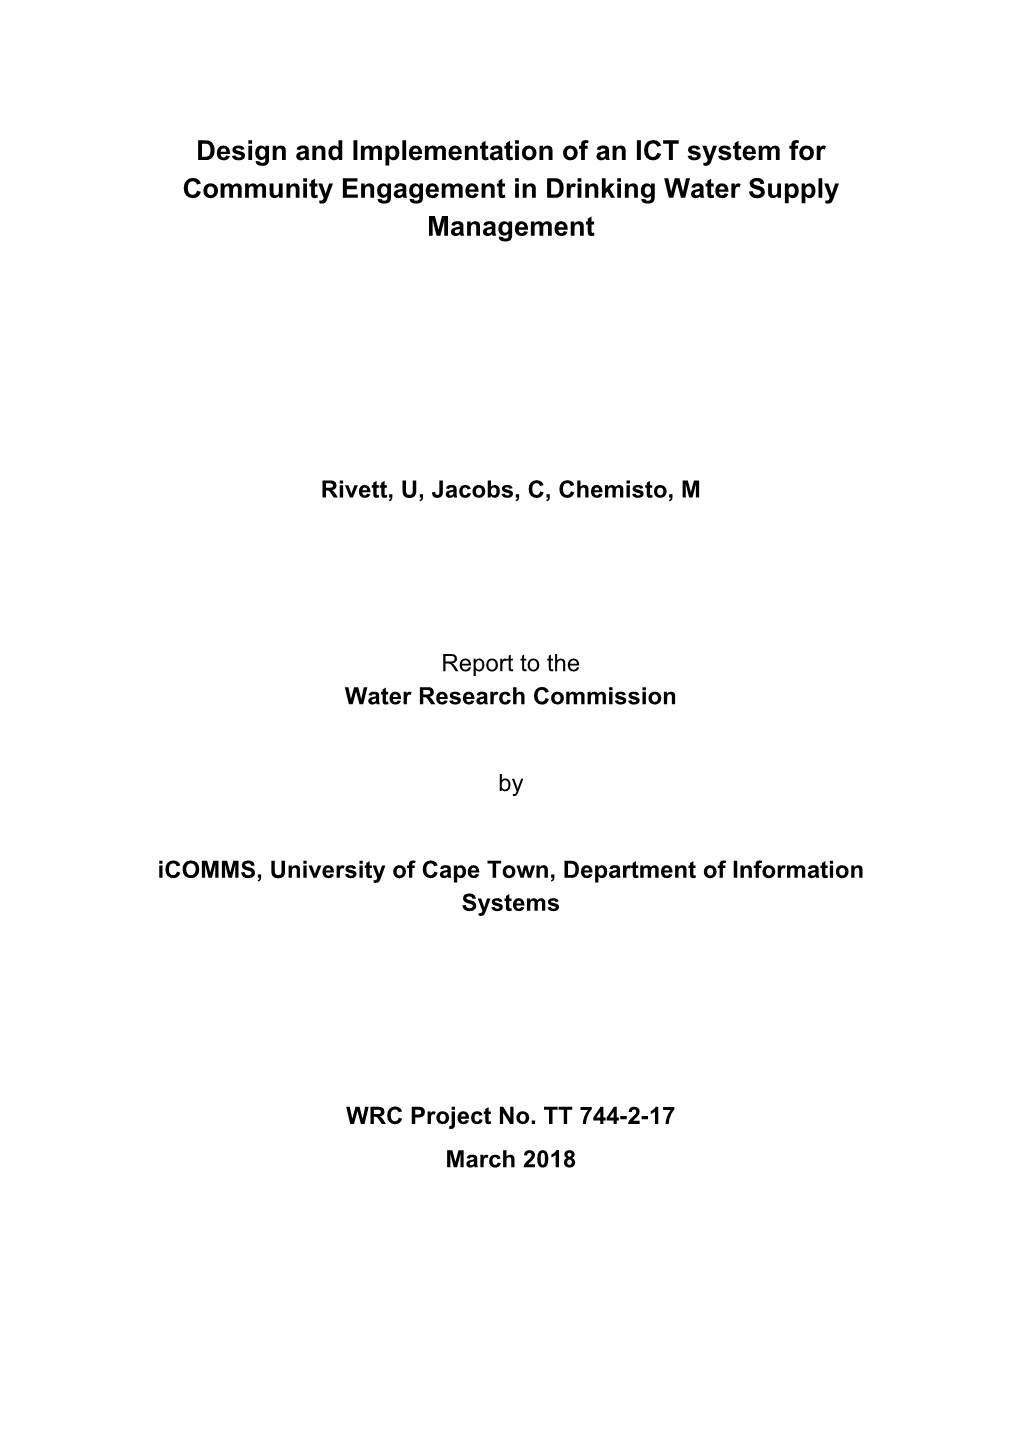 Design and Implementation of an ICT System for Community Engagement in Drinking Water Supply Management